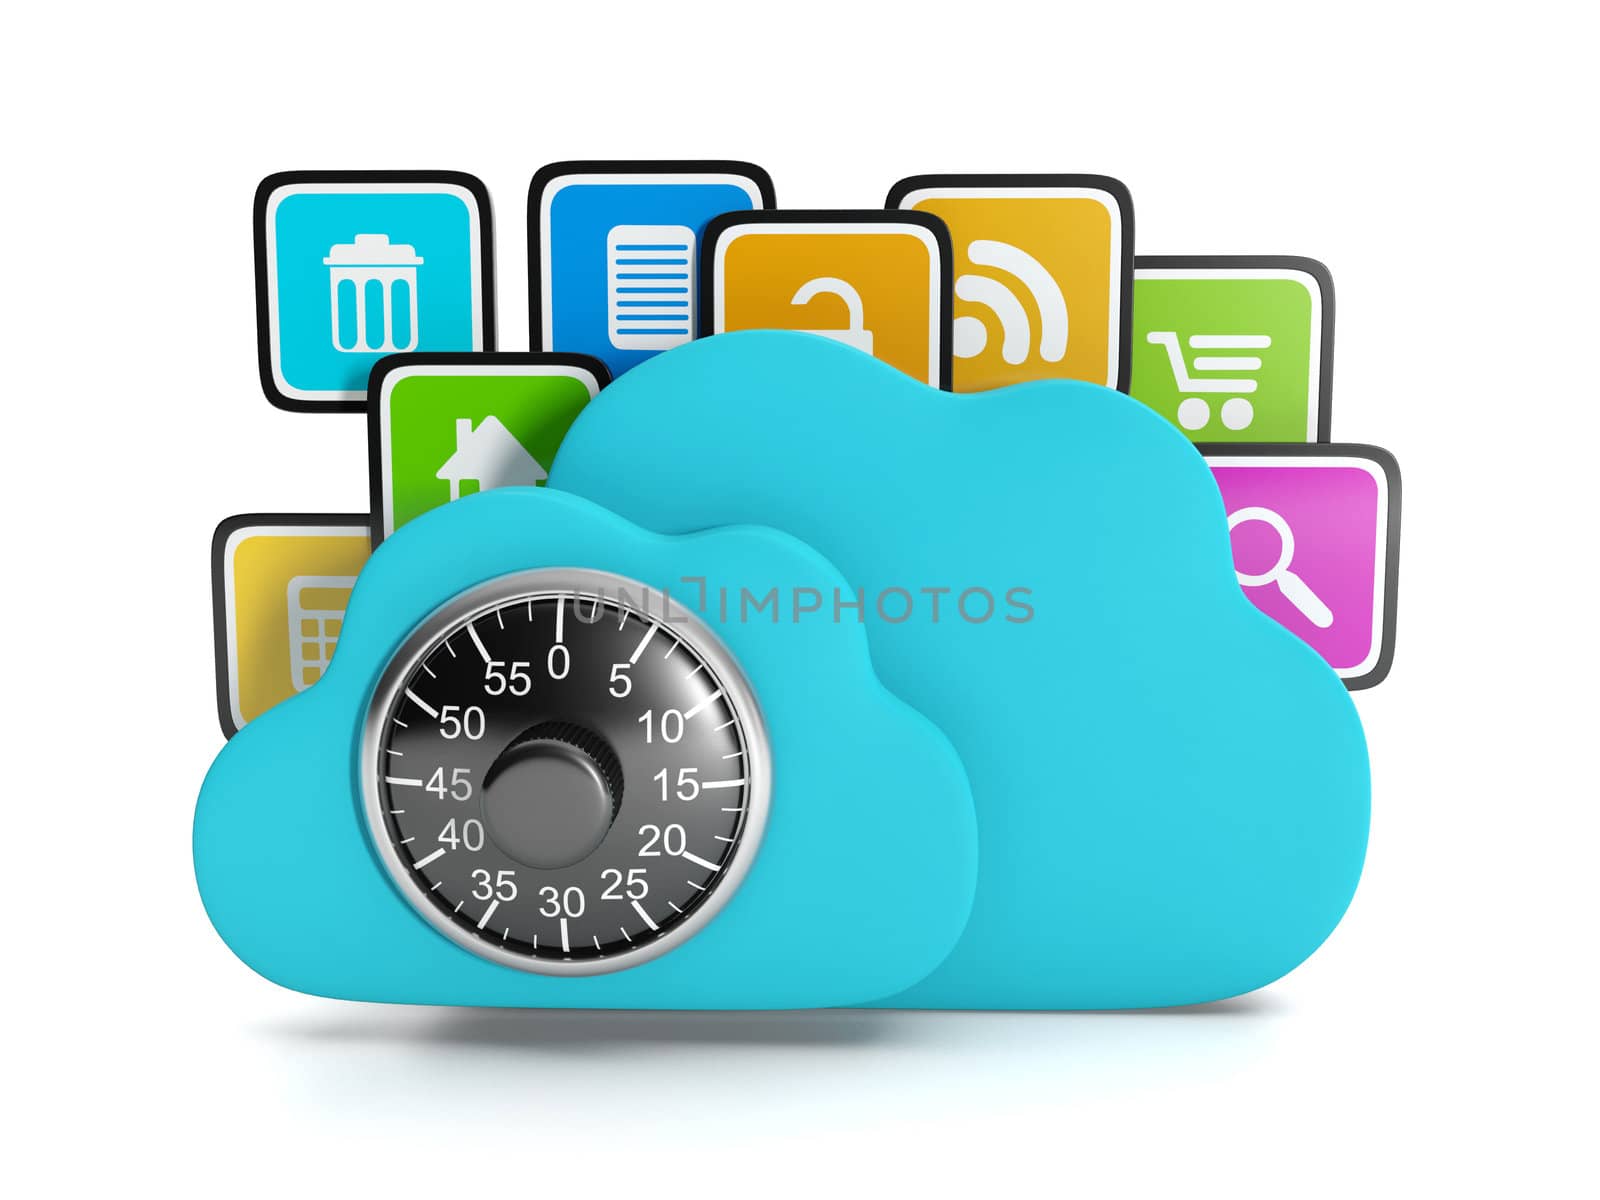 3d Illustration: Computer Technology Internet. Cloud computer icons, information security